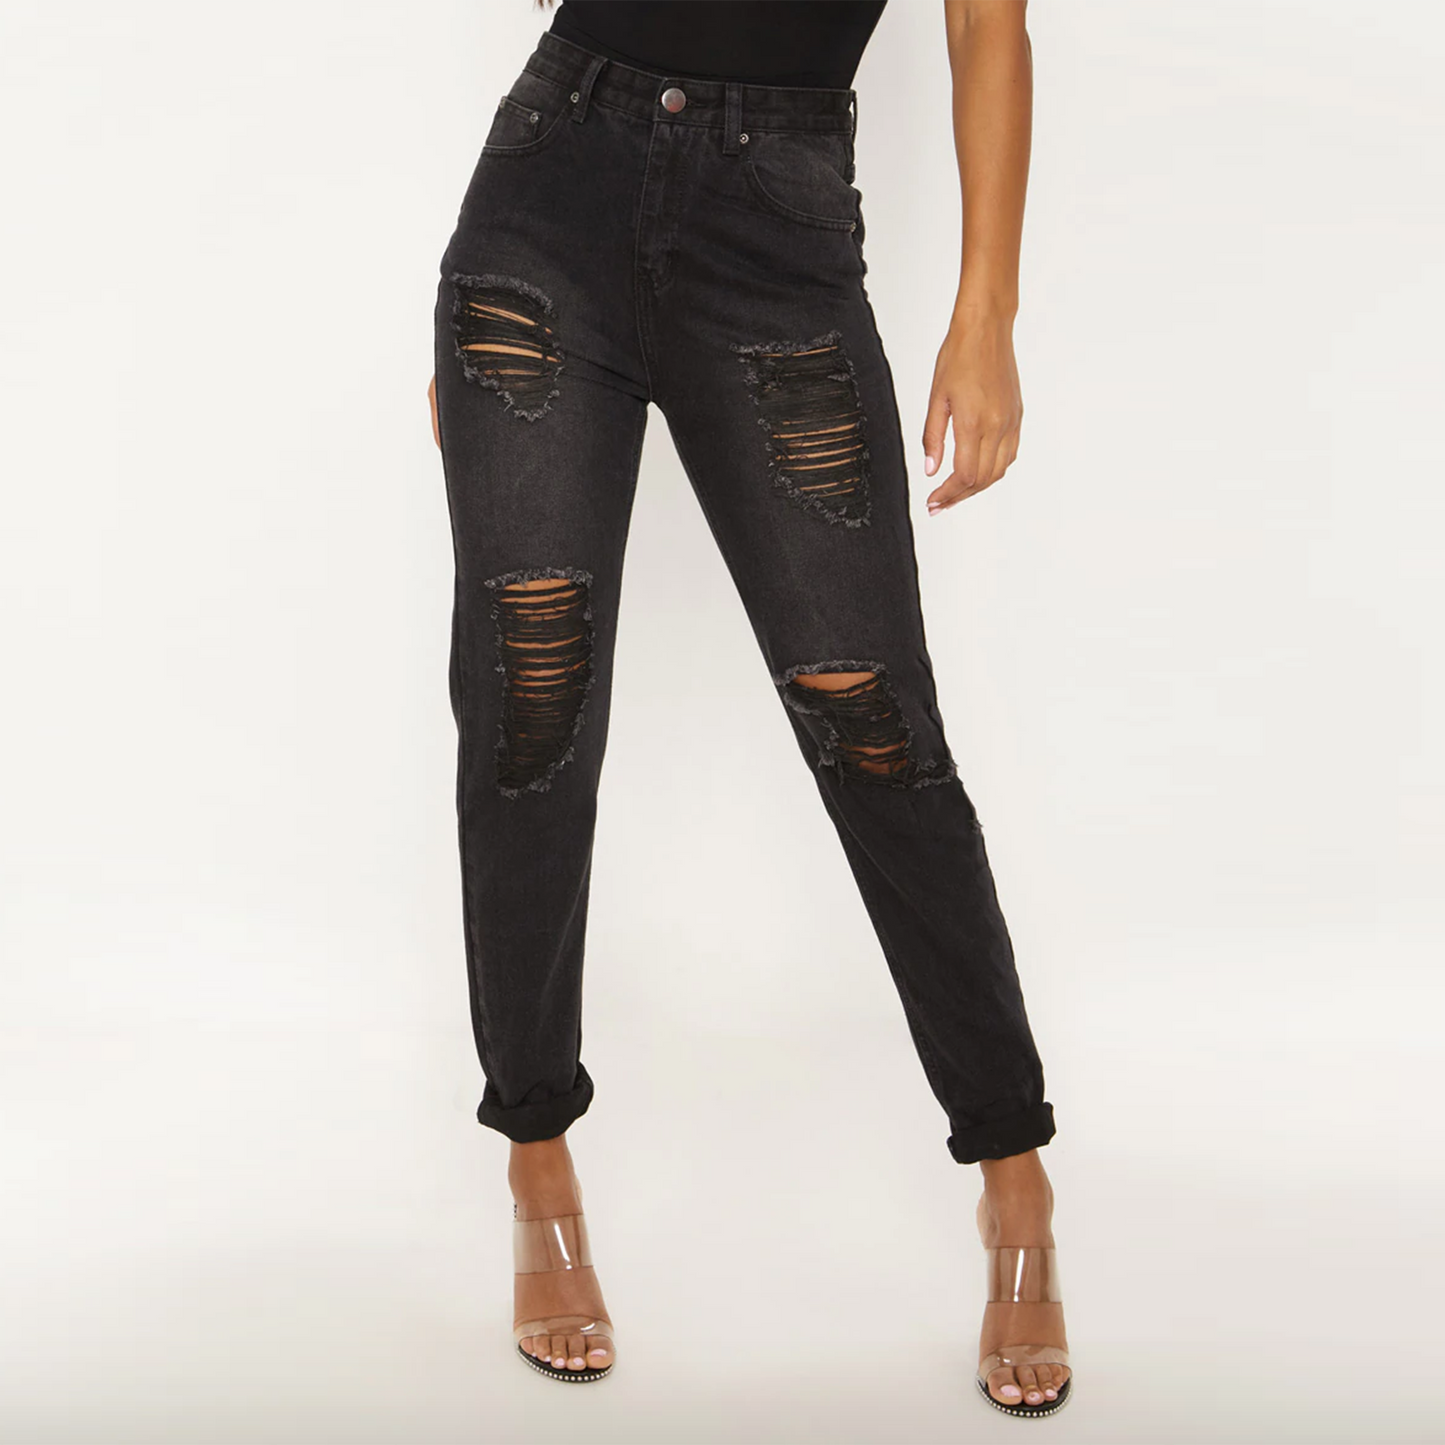 nwt prettylittlething extreme wash ripped turn up mom jeans - size 4